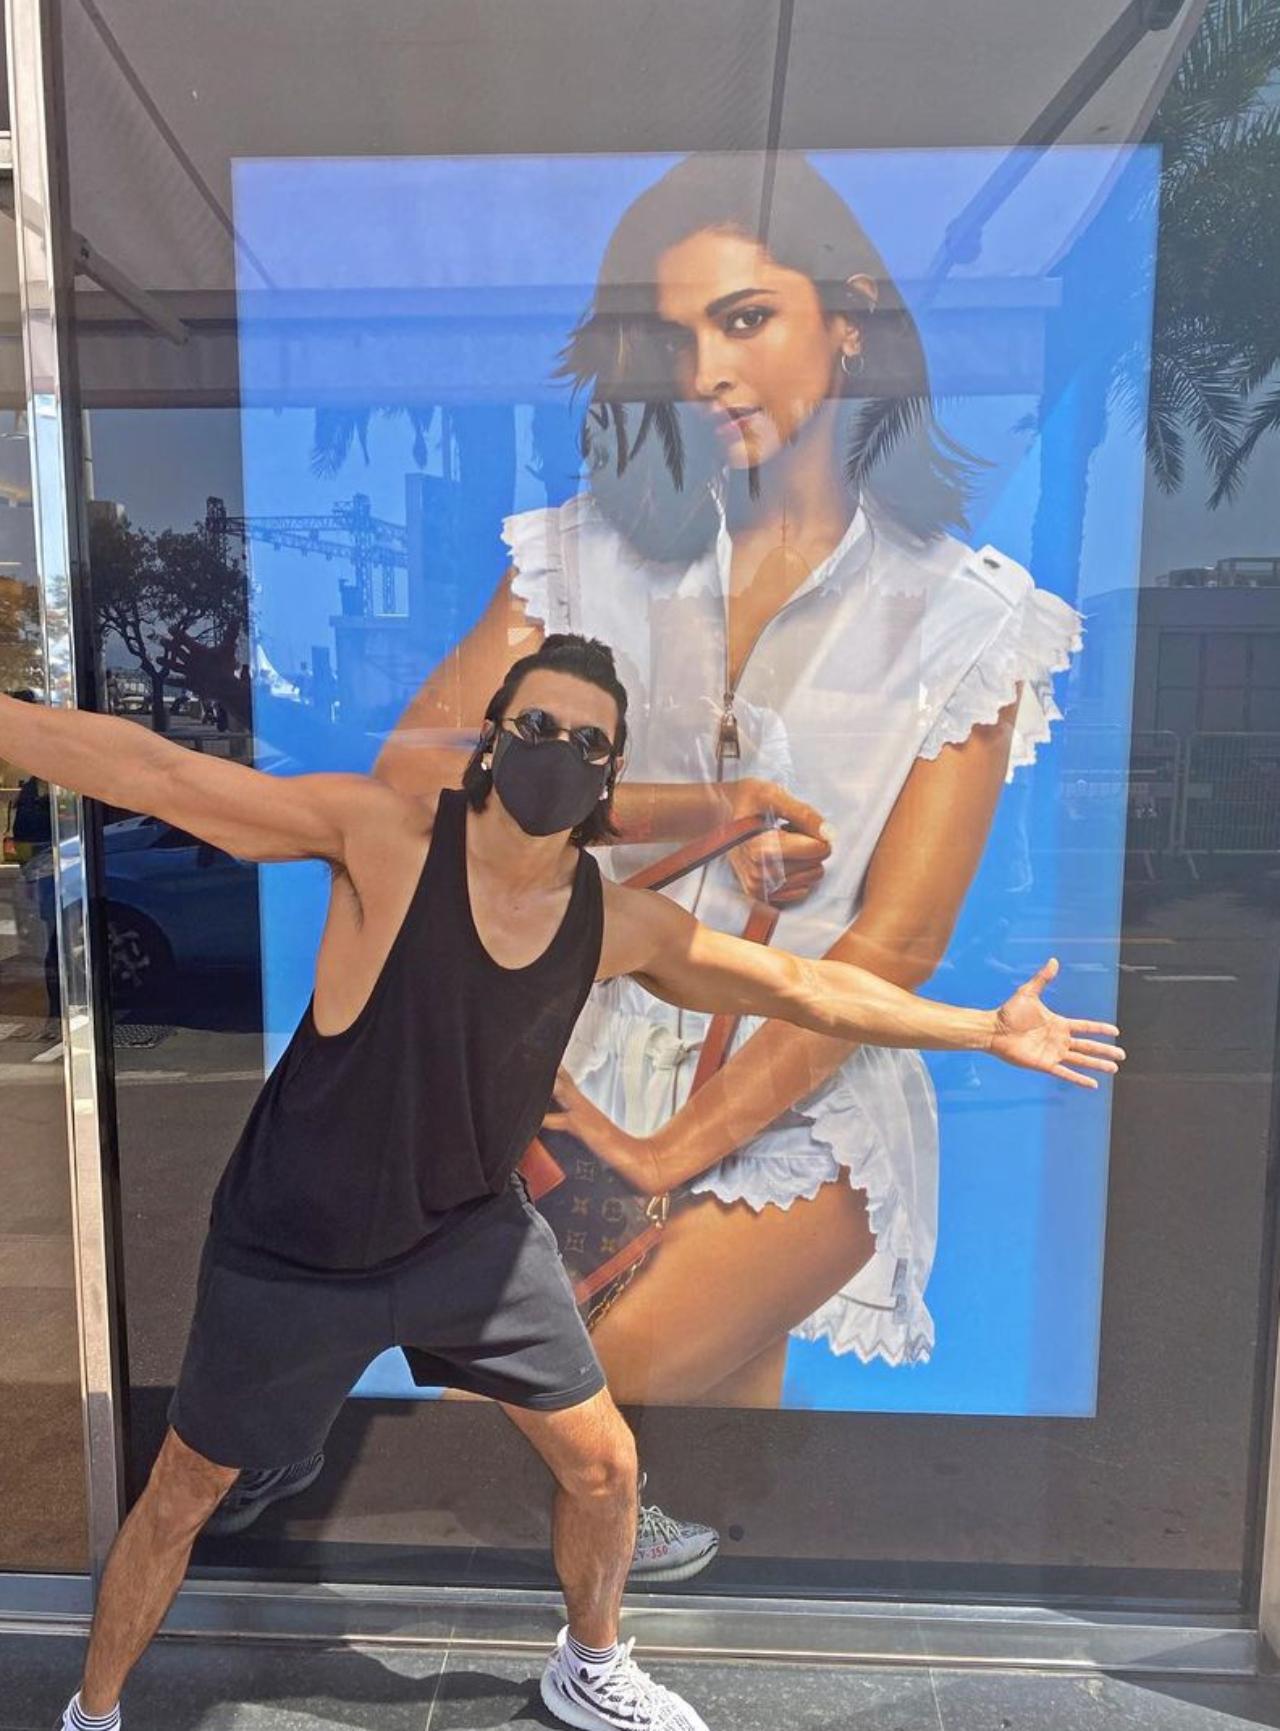 Even when Ranveer is travelling solo, he finds a way to include his wife. He had shared this picture of him posing with a poster of Deepika in the USA